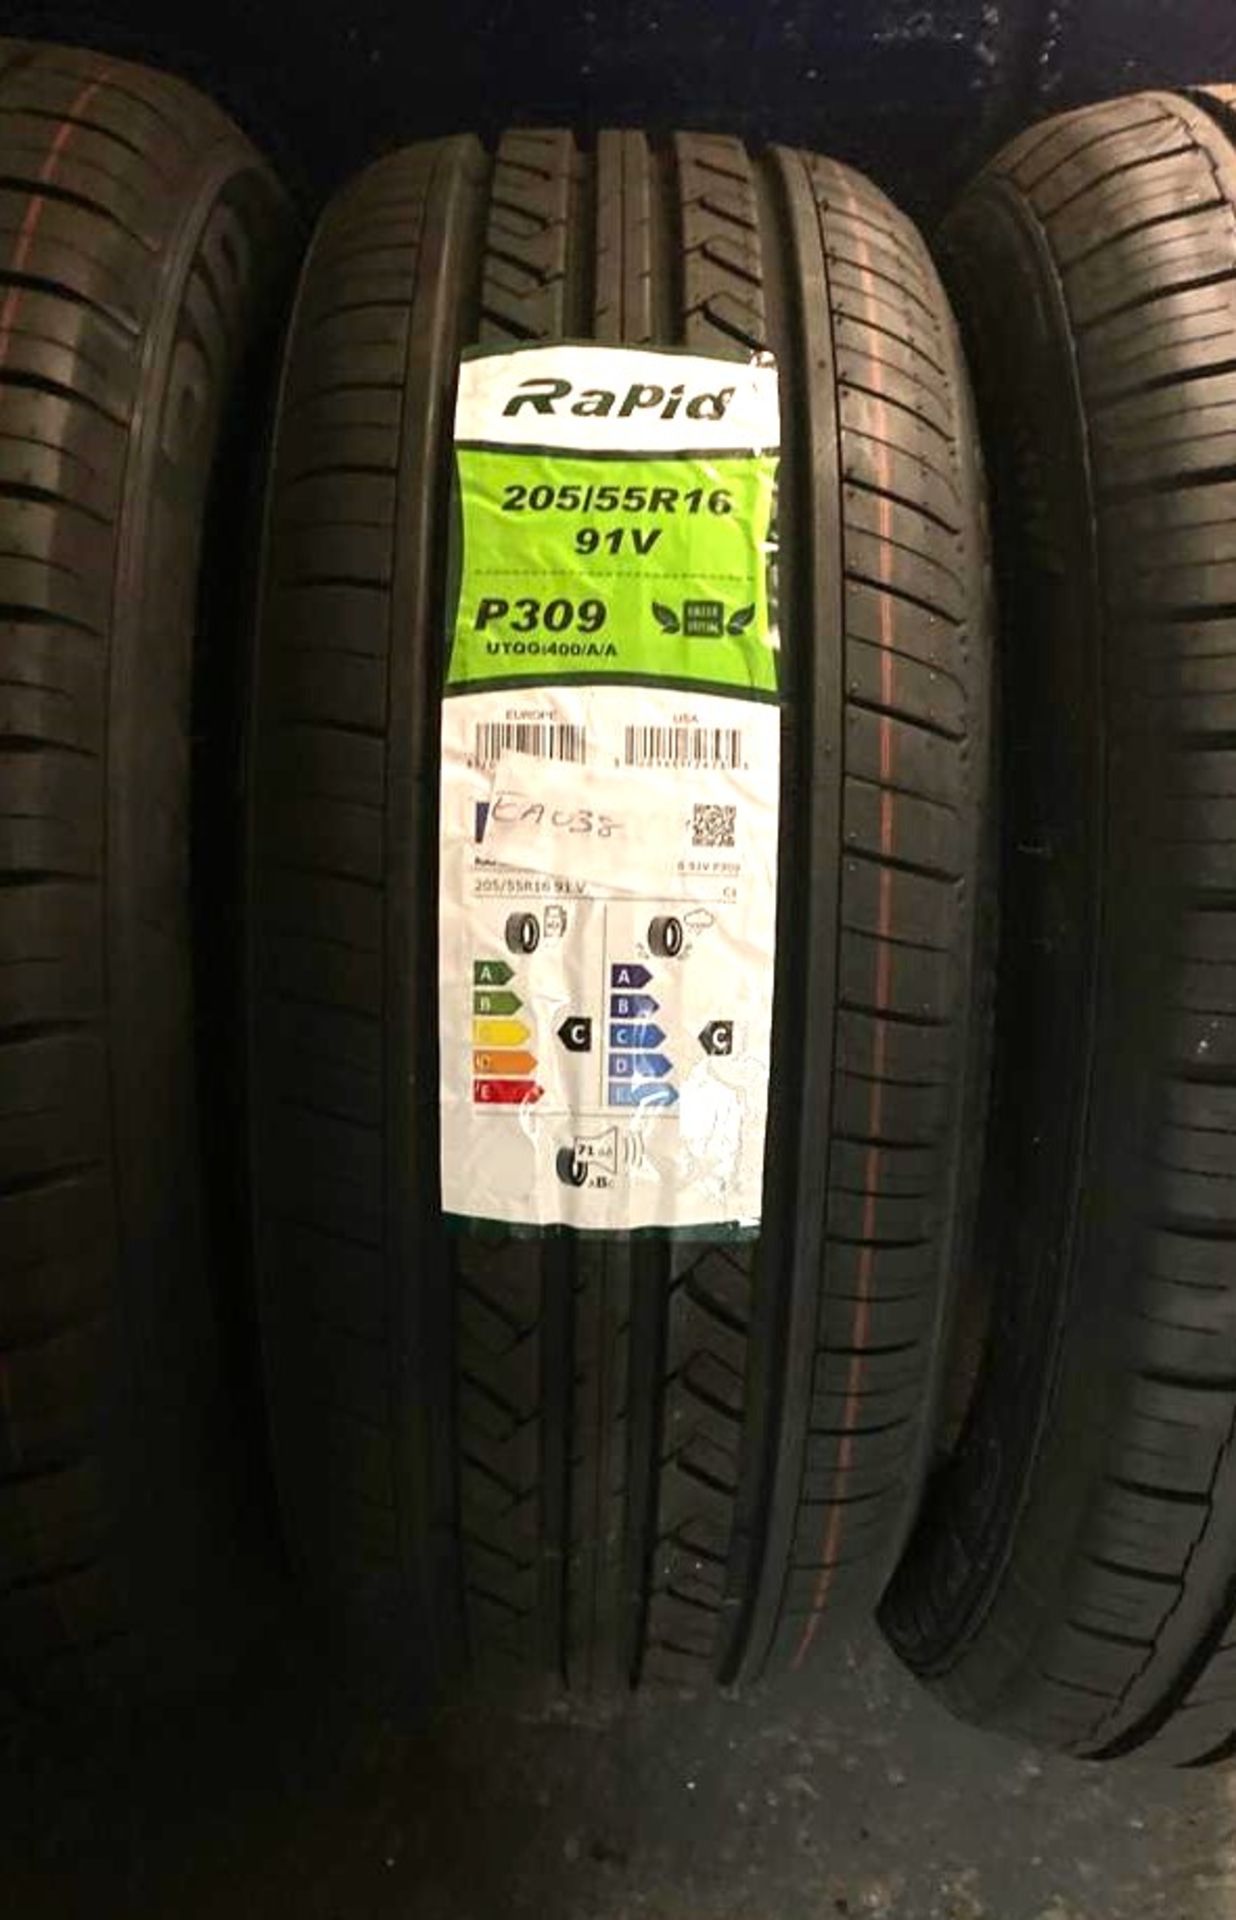 1 x Rapid P309 Motor Vehicle Car Tyre - Size: 205/55R 16 91V - New and Unused